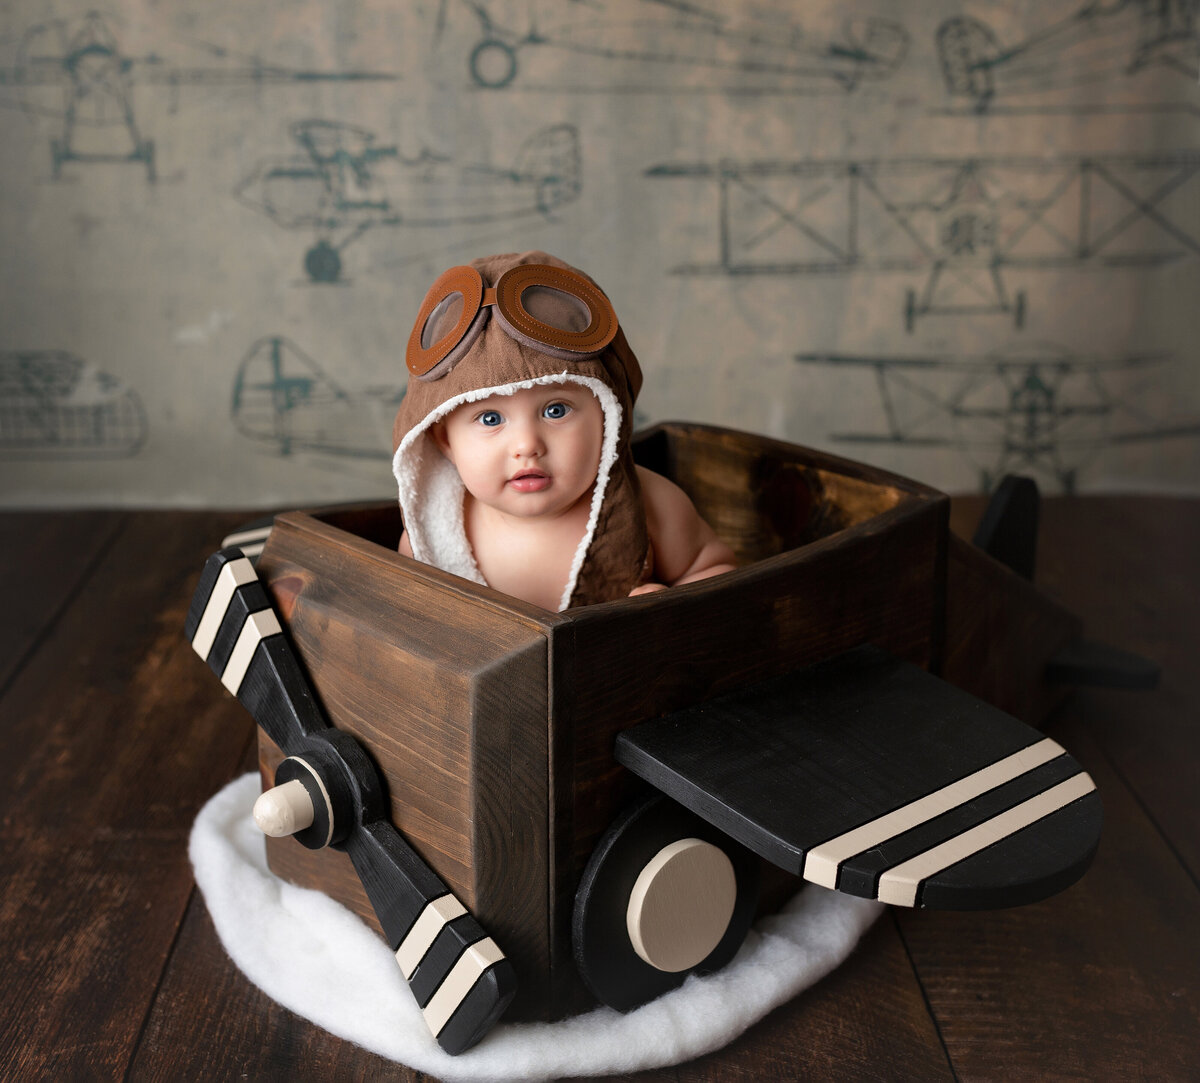 Baby boy 6-month milestone photo shoot in West Palm Beach and Boynton Beach photography studio.  Baby boy is sitting in an airplane inspired crate and vintage pilot cap. Baby is looking at the camera. Backdrop is vintage plane sketches.